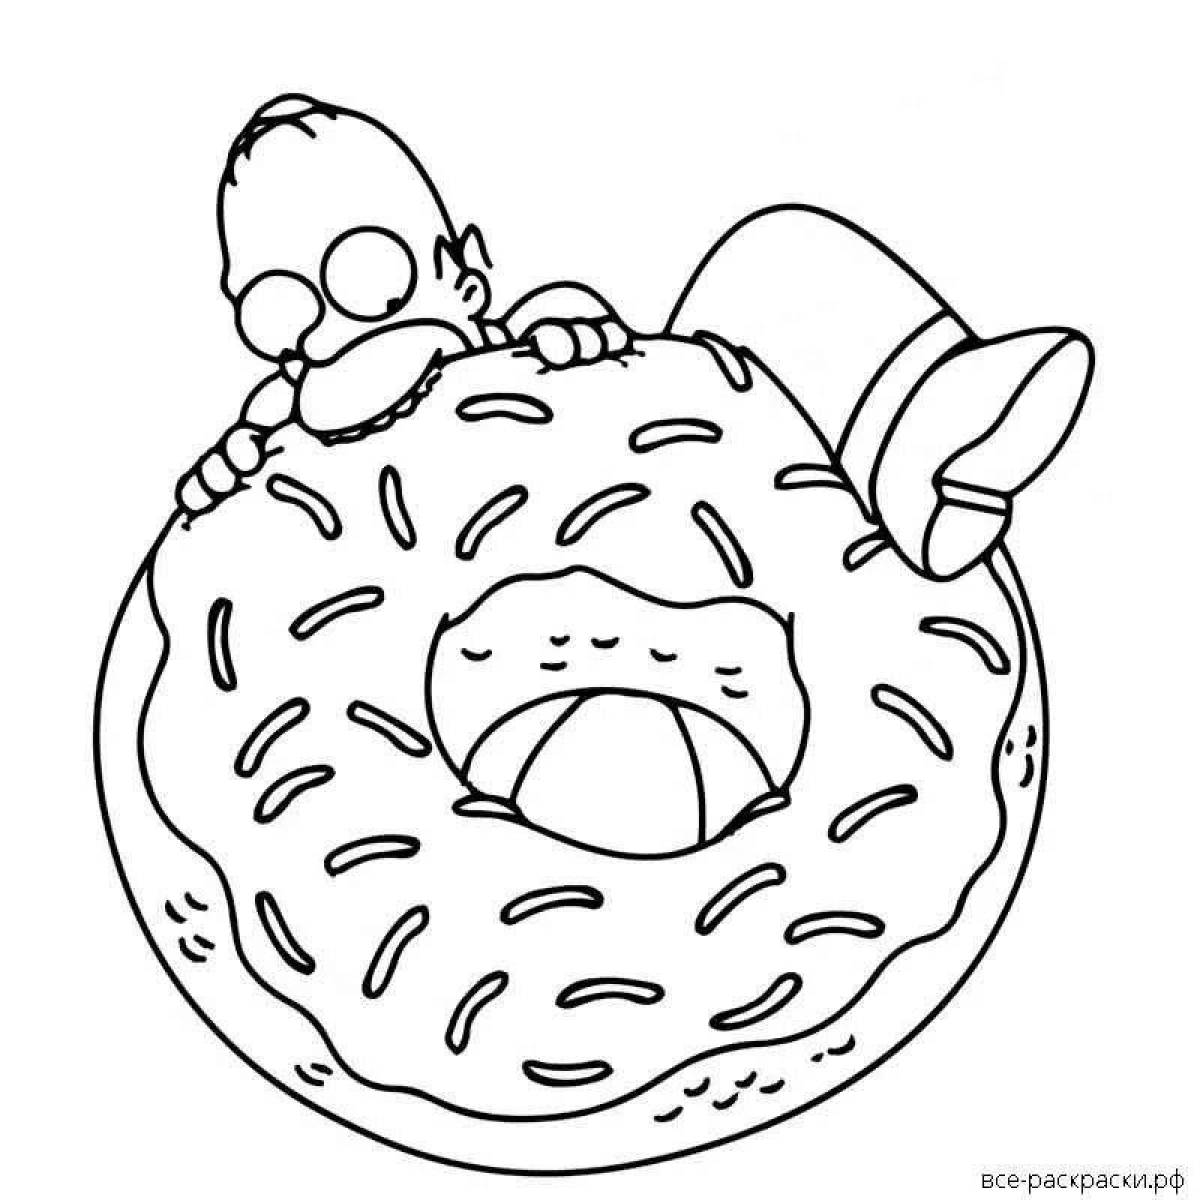 Coloring page cute donut cat